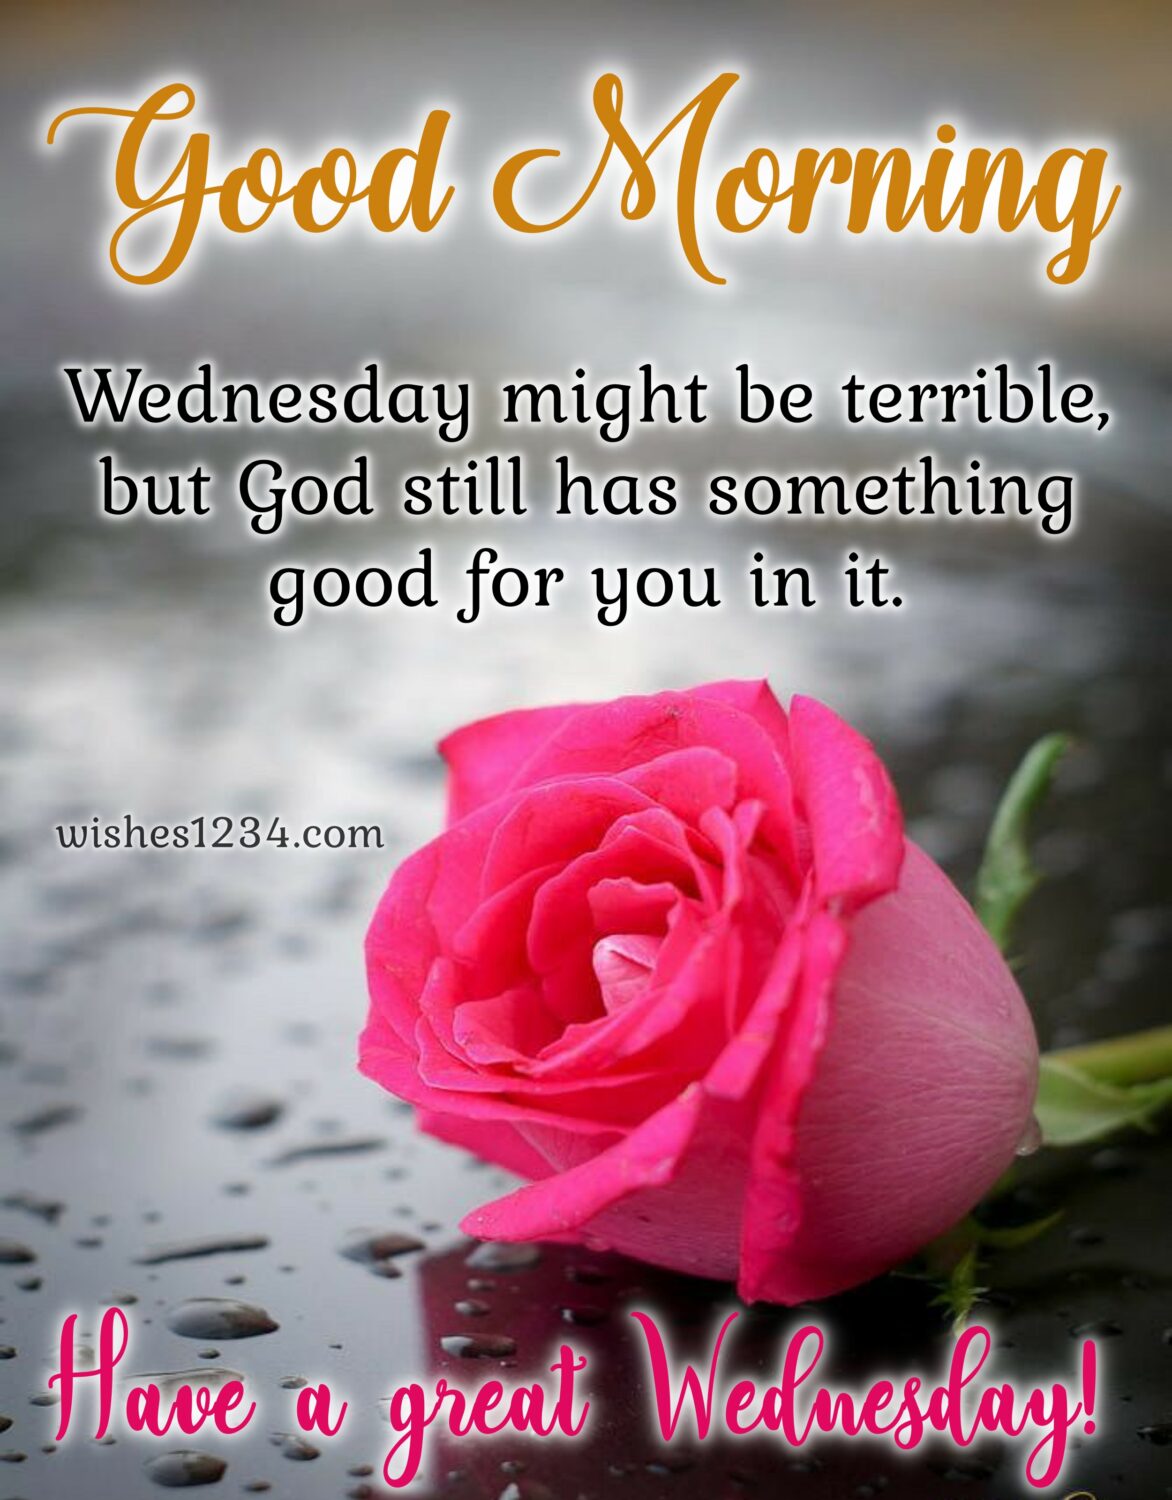 Wednesday wishes with red rose flower, Wednesday Morning Quotes.